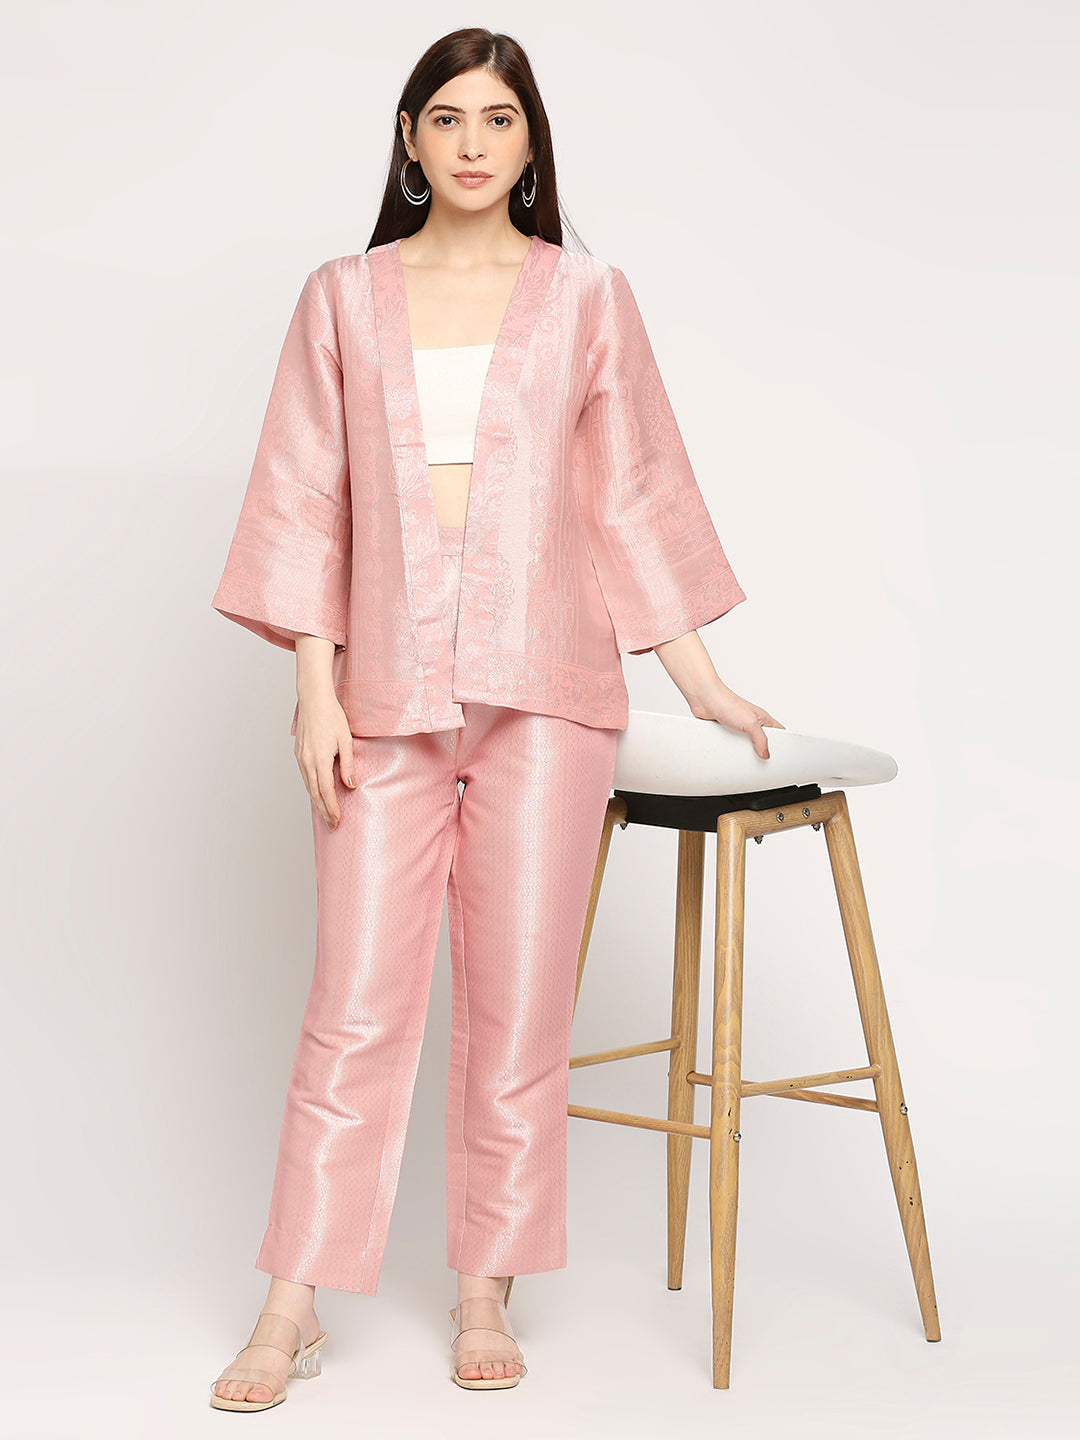 Brocade Peach French Patterned Jacket